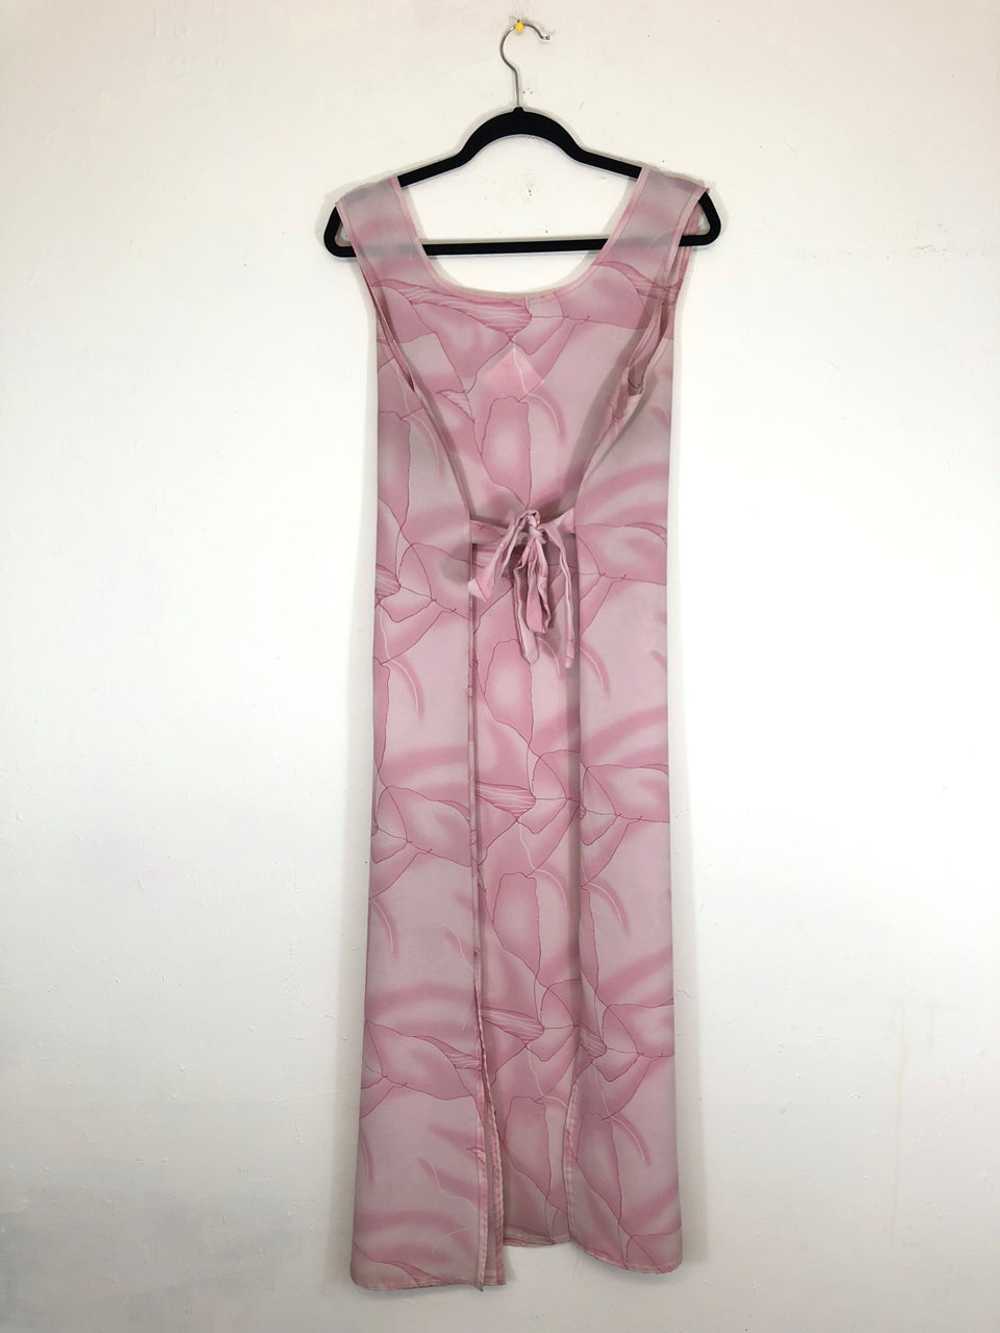 Abstract Pink Flowers Dress - image 3